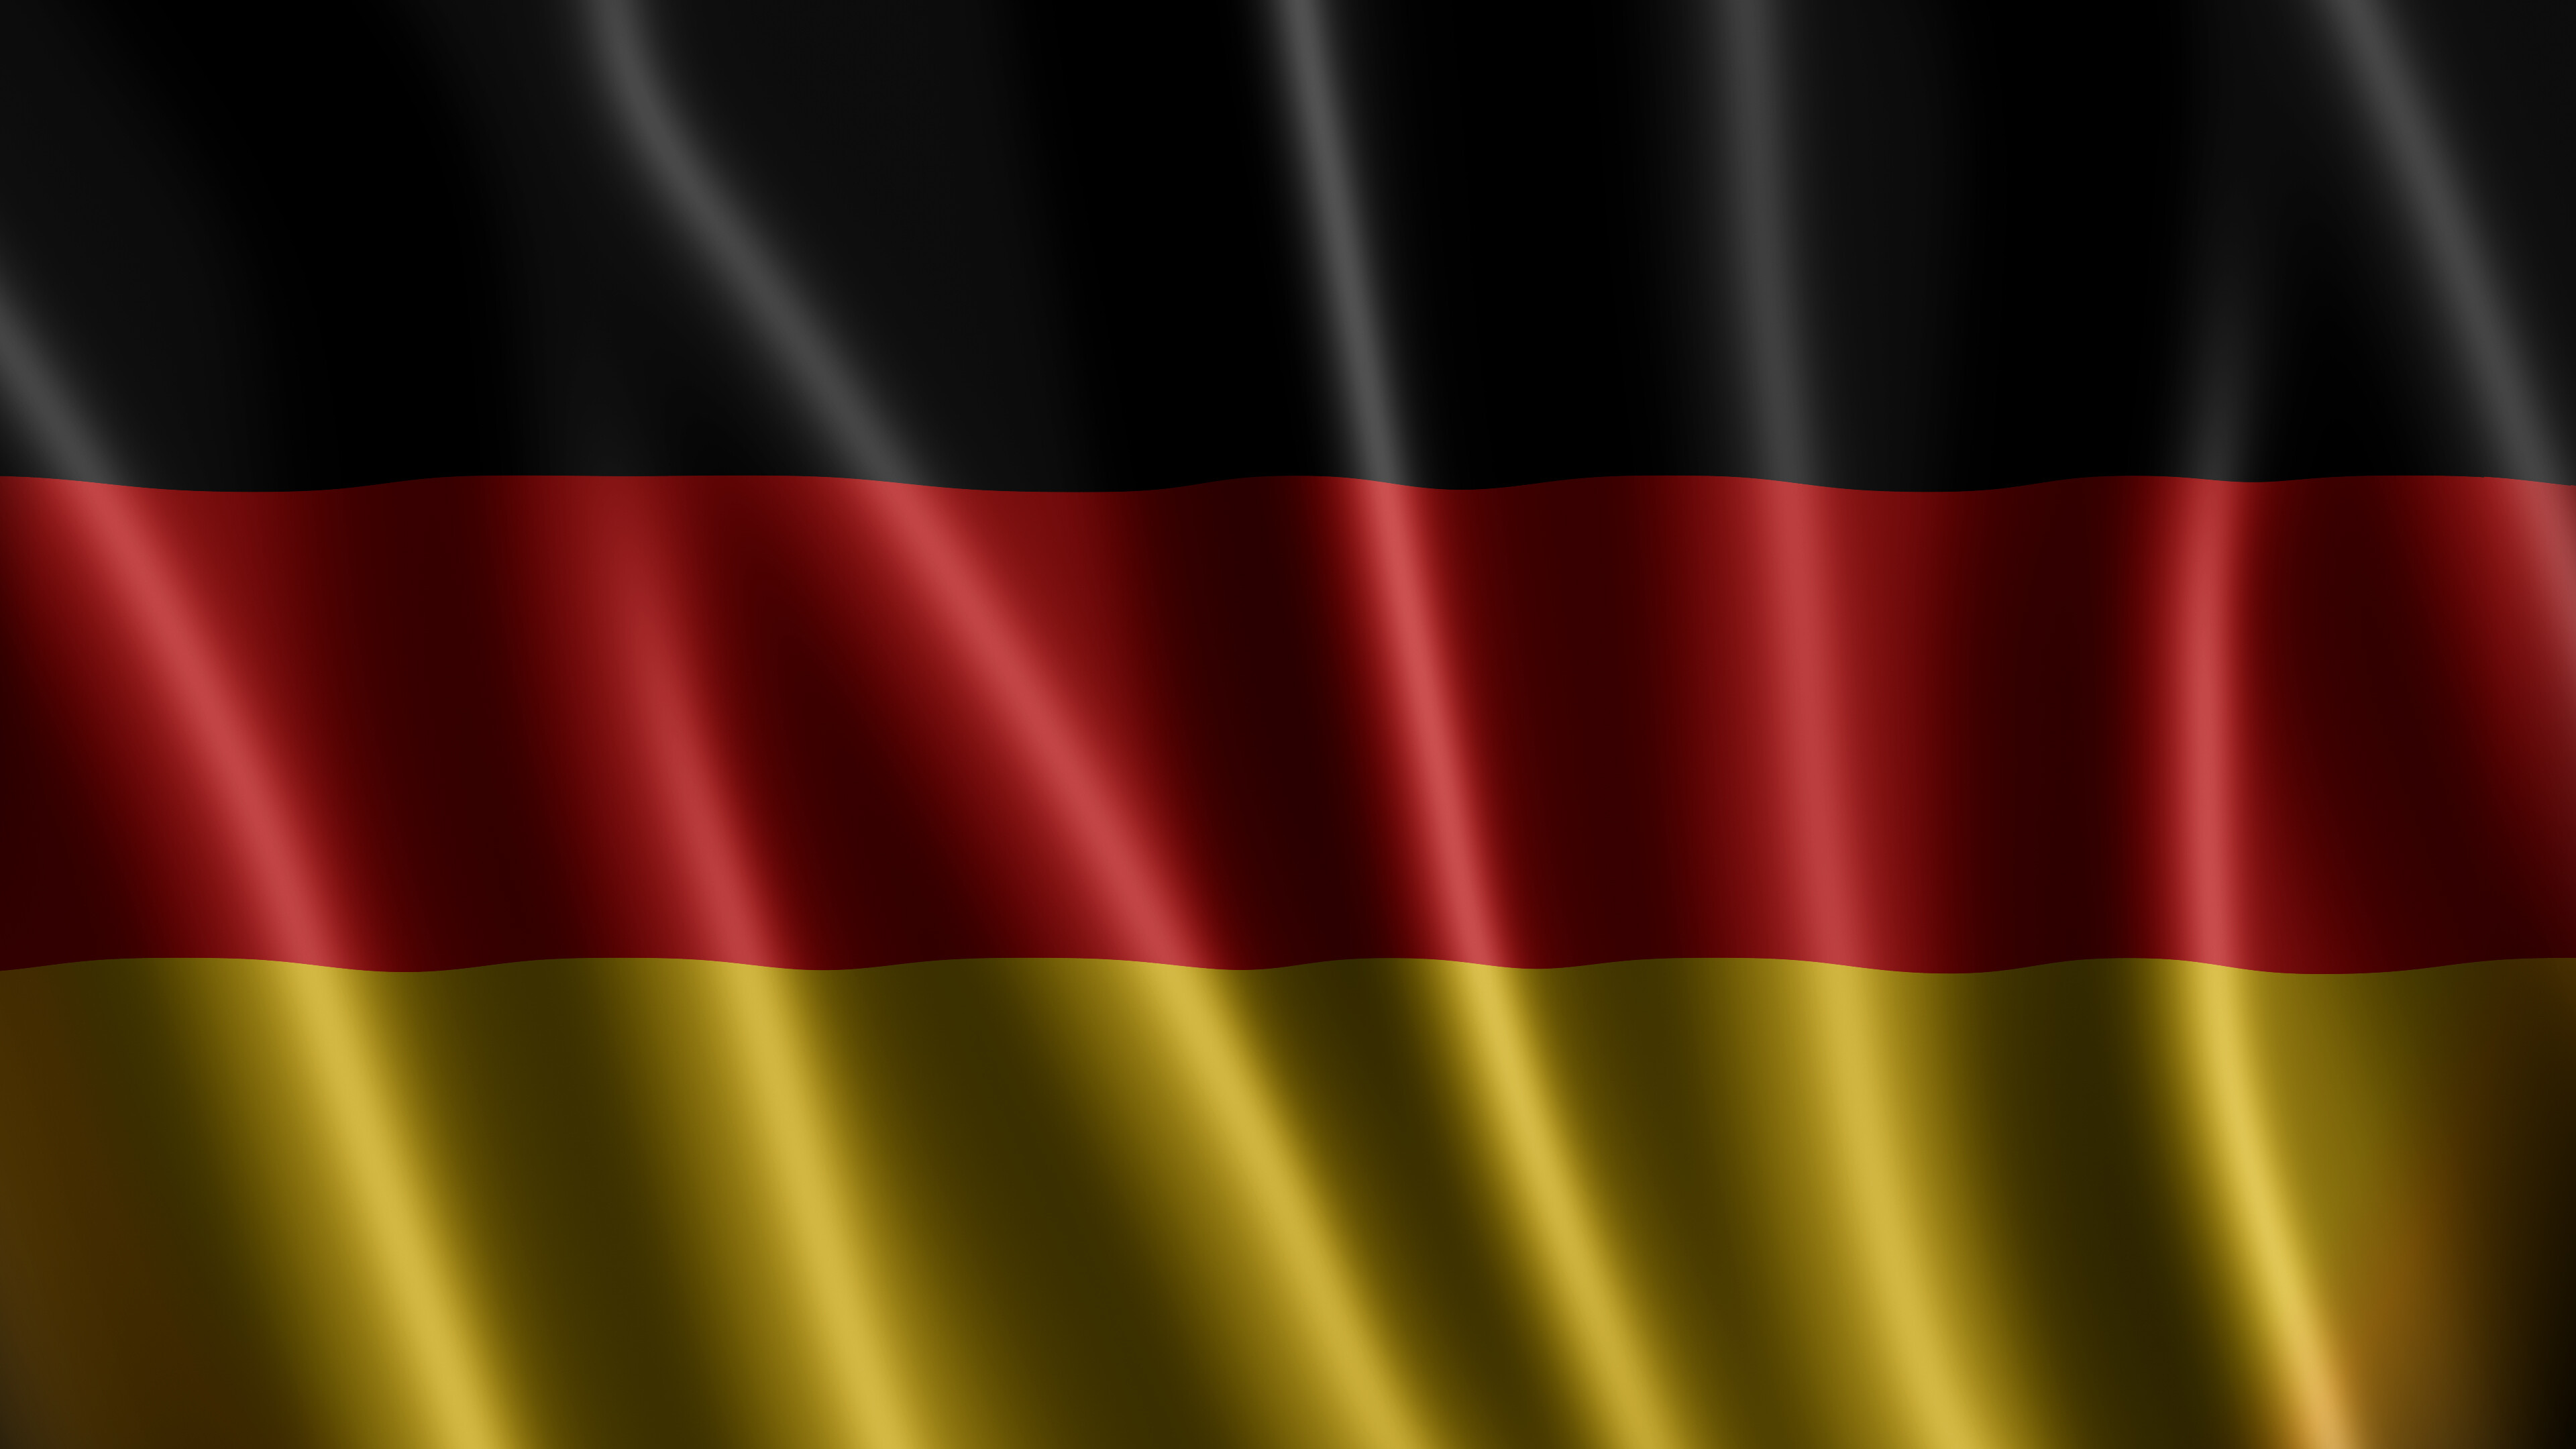 Flag of Germany: Sable, Tincture black, Gules, Or, Heraldry, The idea of a unified state, The Weimar Republic. 3840x2160 4K Background.